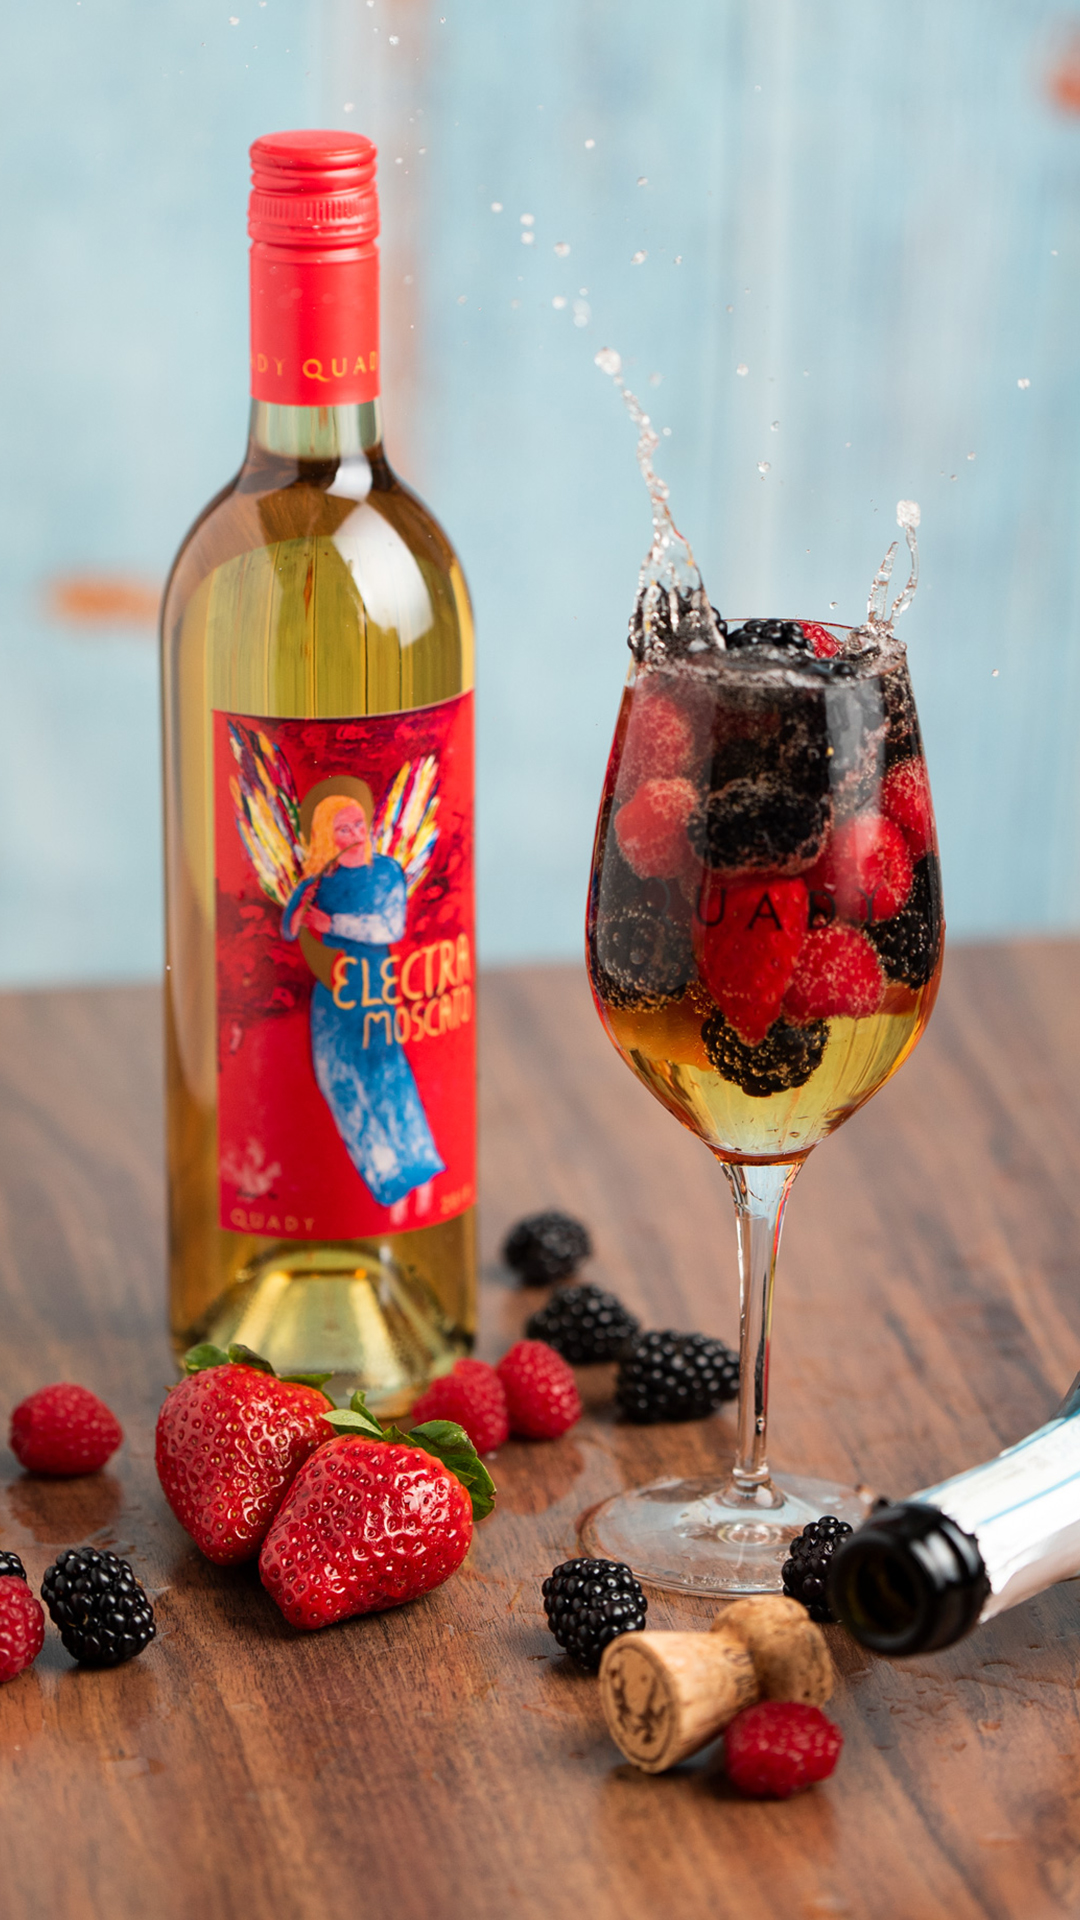 Prosecco next to Electra bottle with berries.